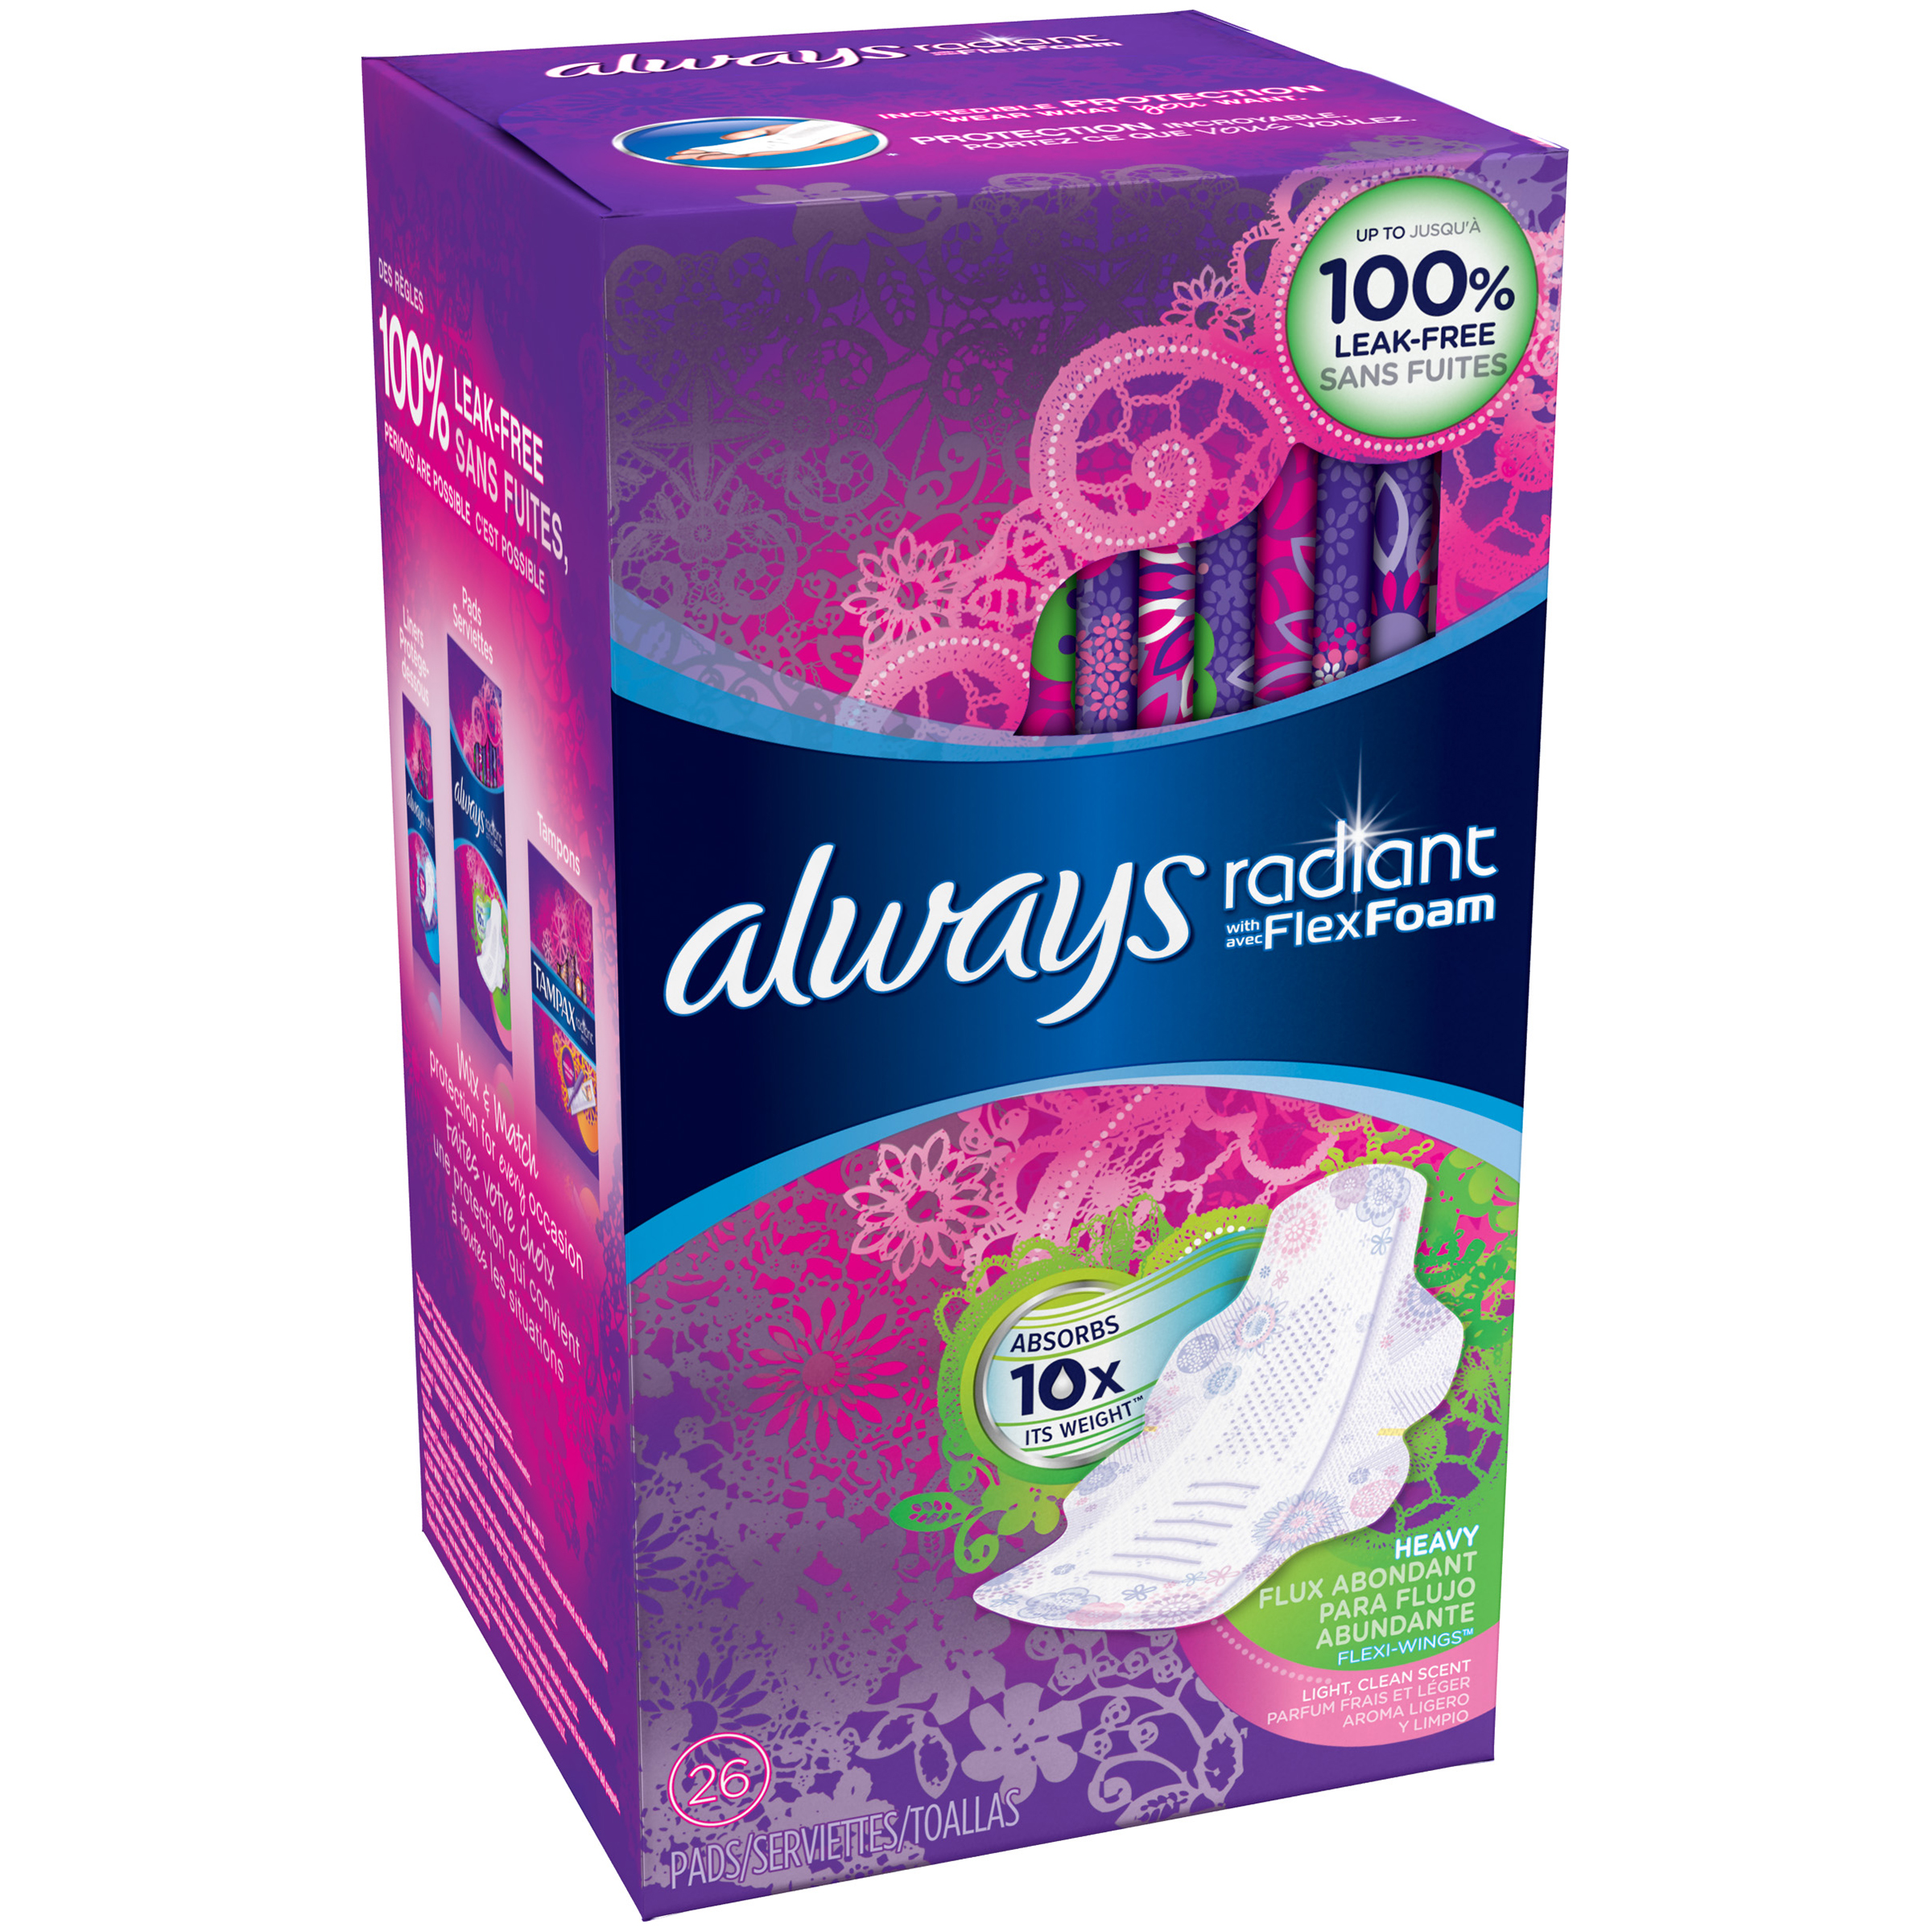 Radiant Heavy with wings scented Pads 26 count